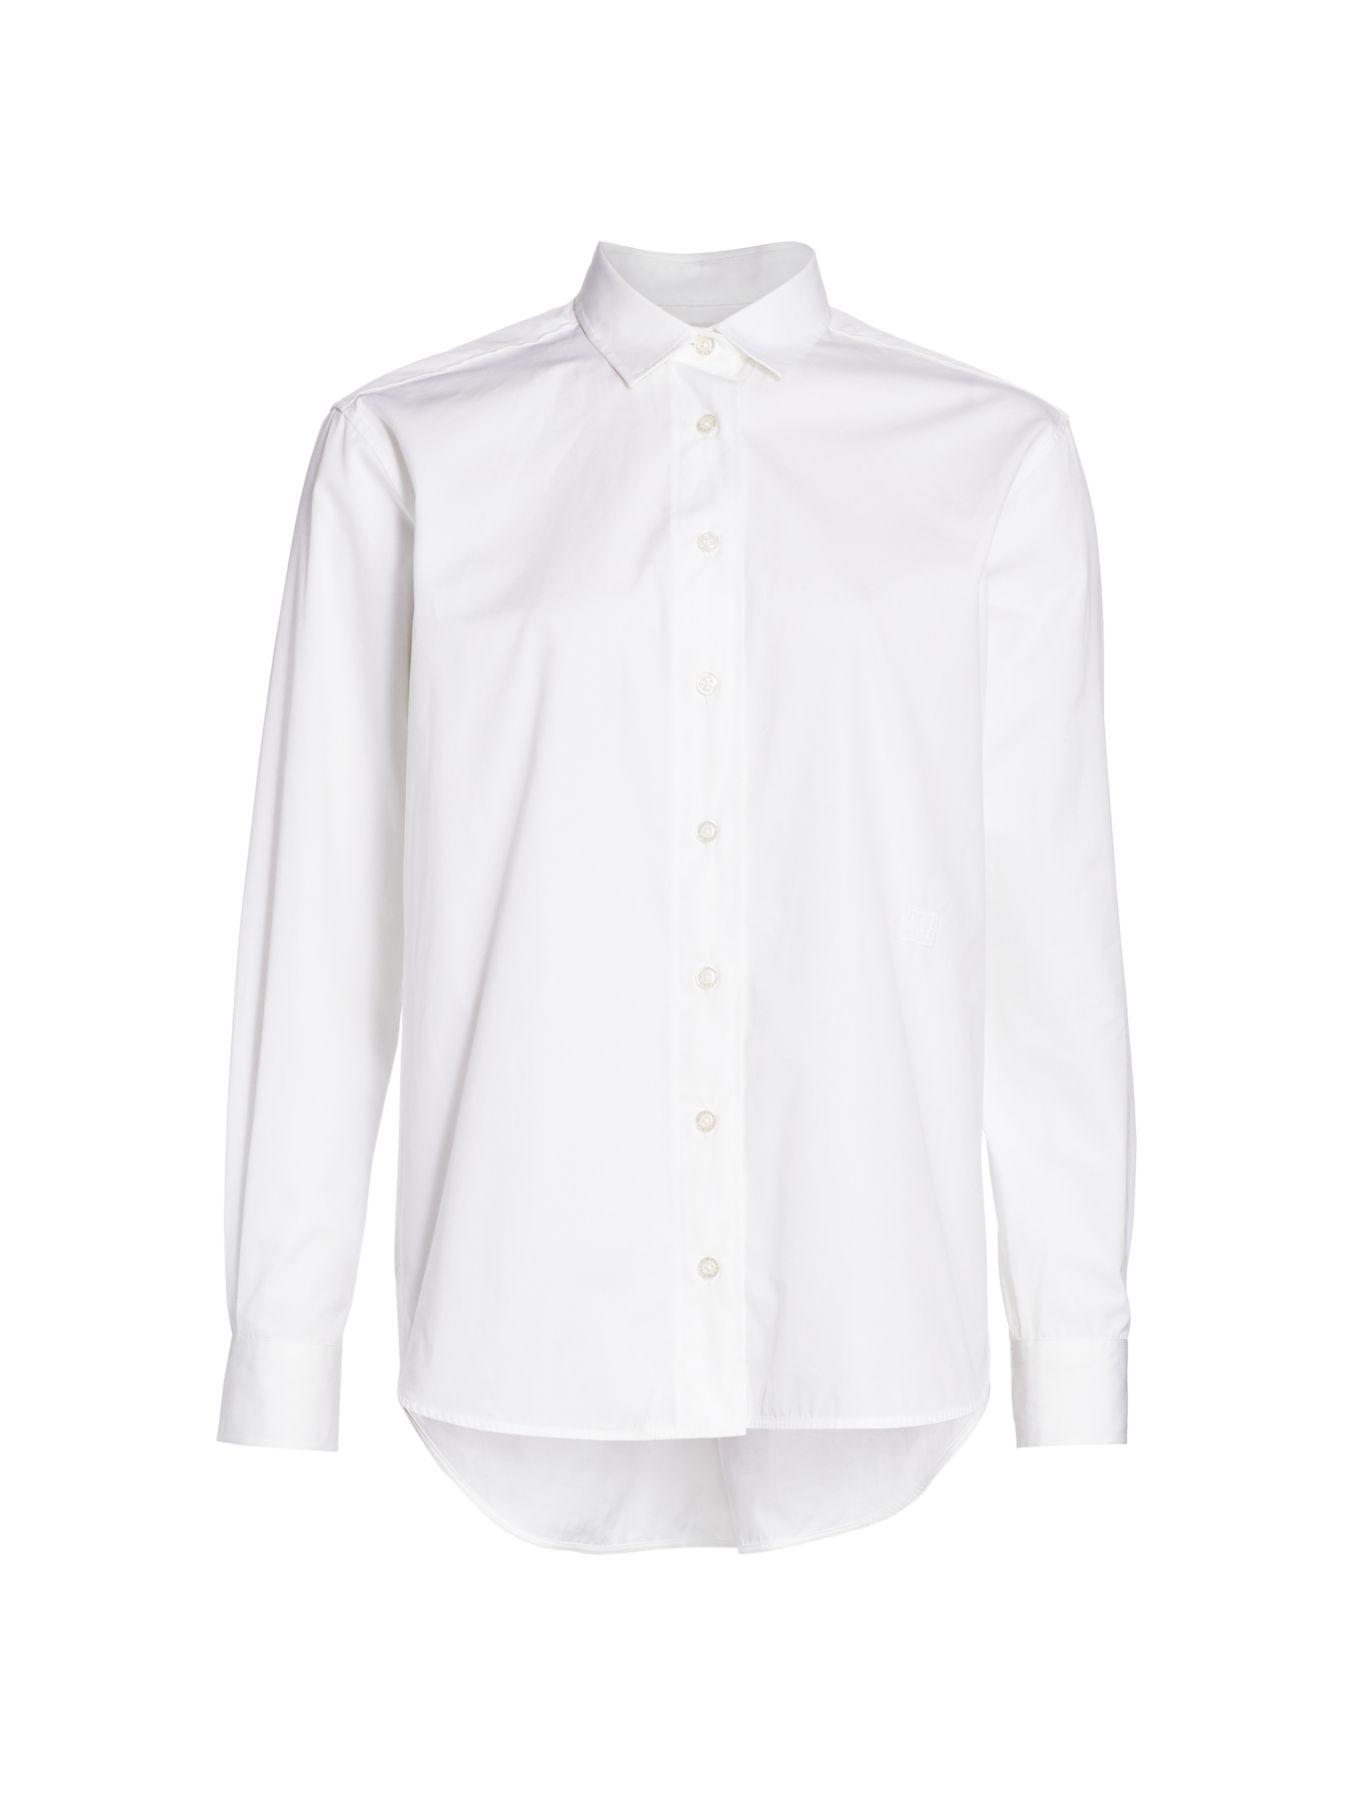 Totême Synthetic Capri Oversized Button Down Shirt in White - Lyst